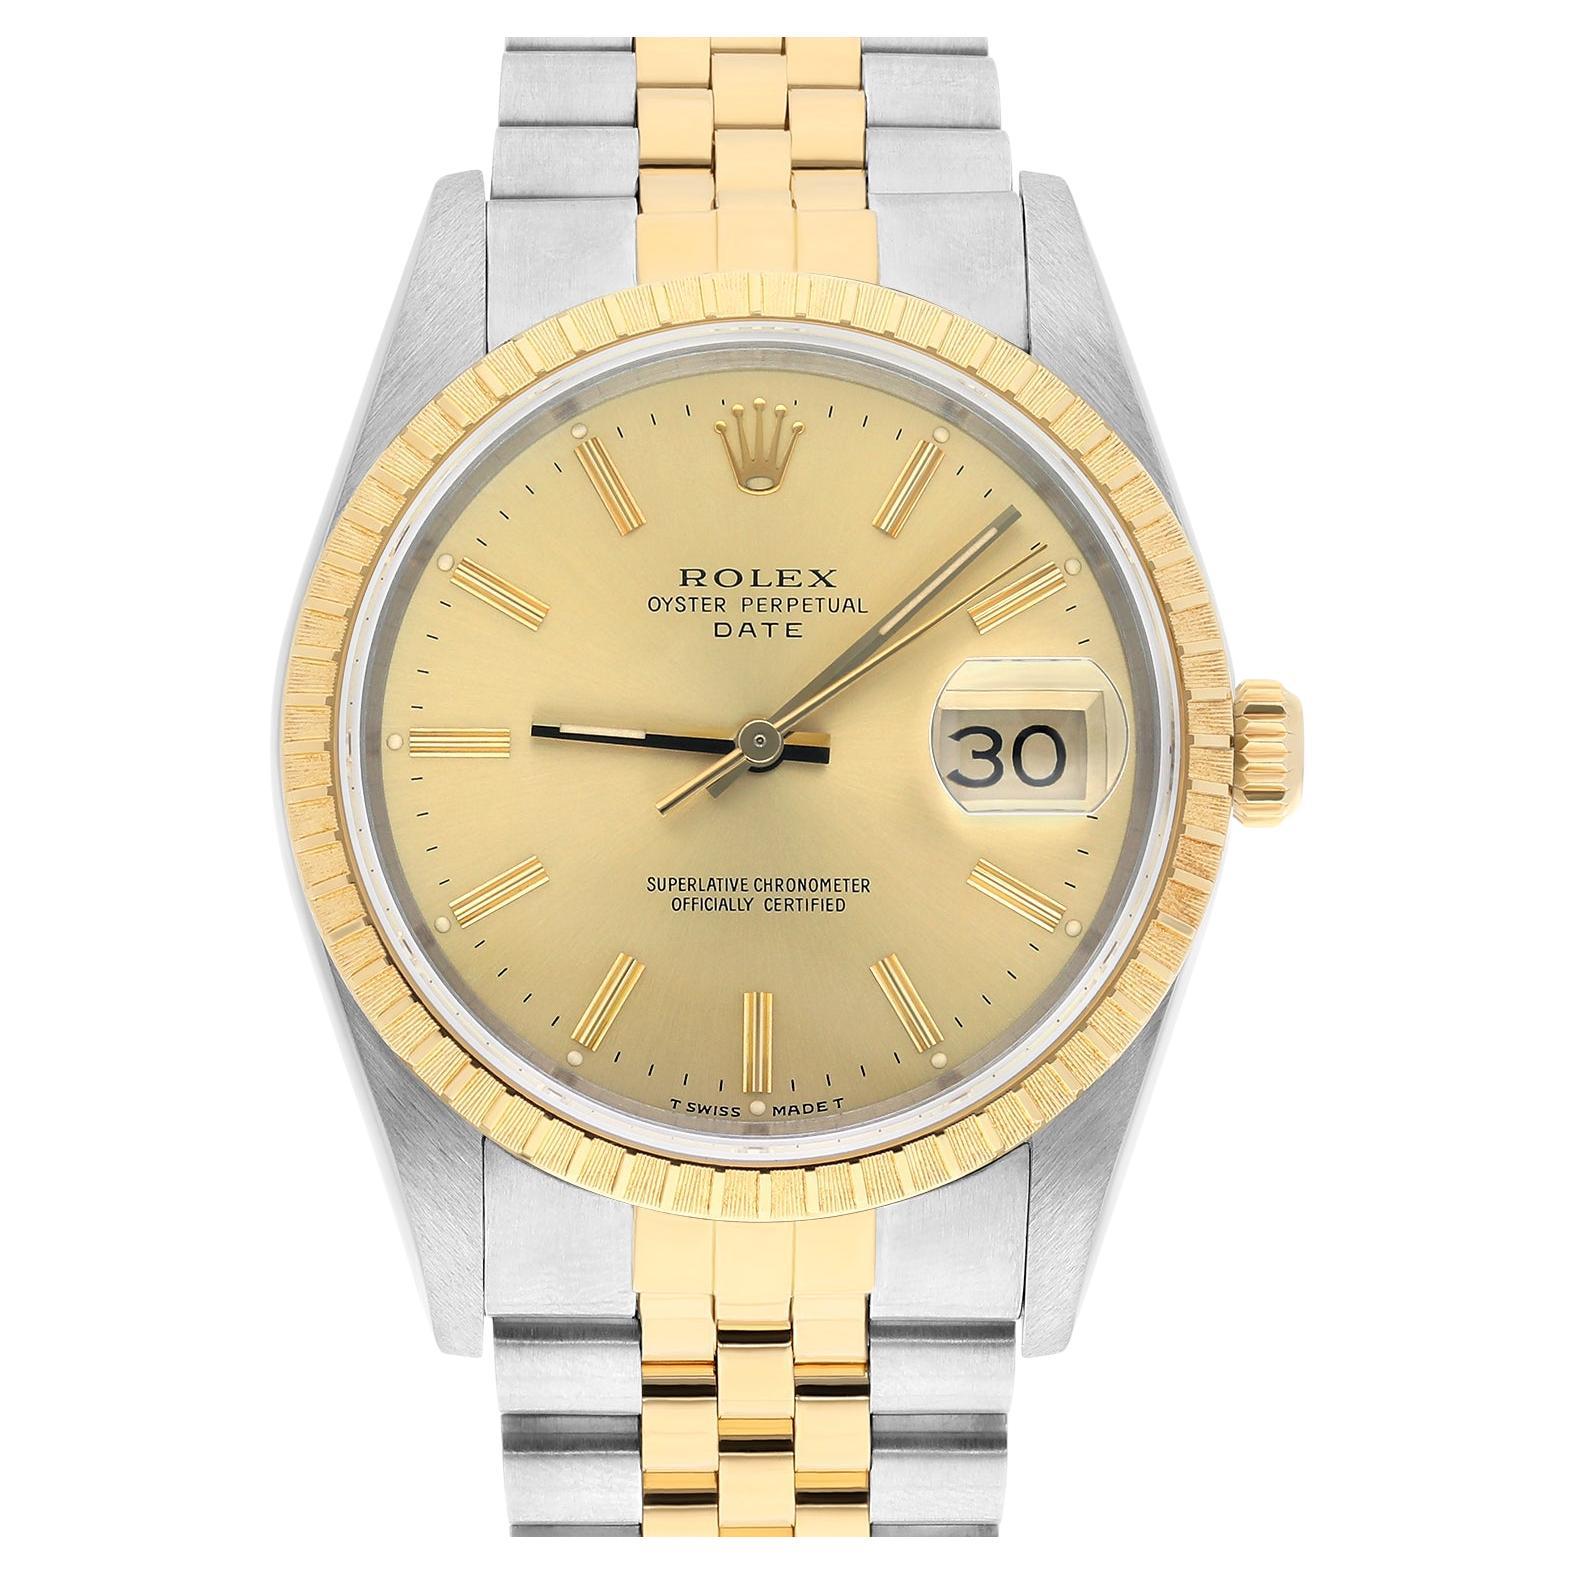 Rolex Oyster Perpetual Date 15223 Steel Yellow Gold Watch Engine Turned Bezel For Sale